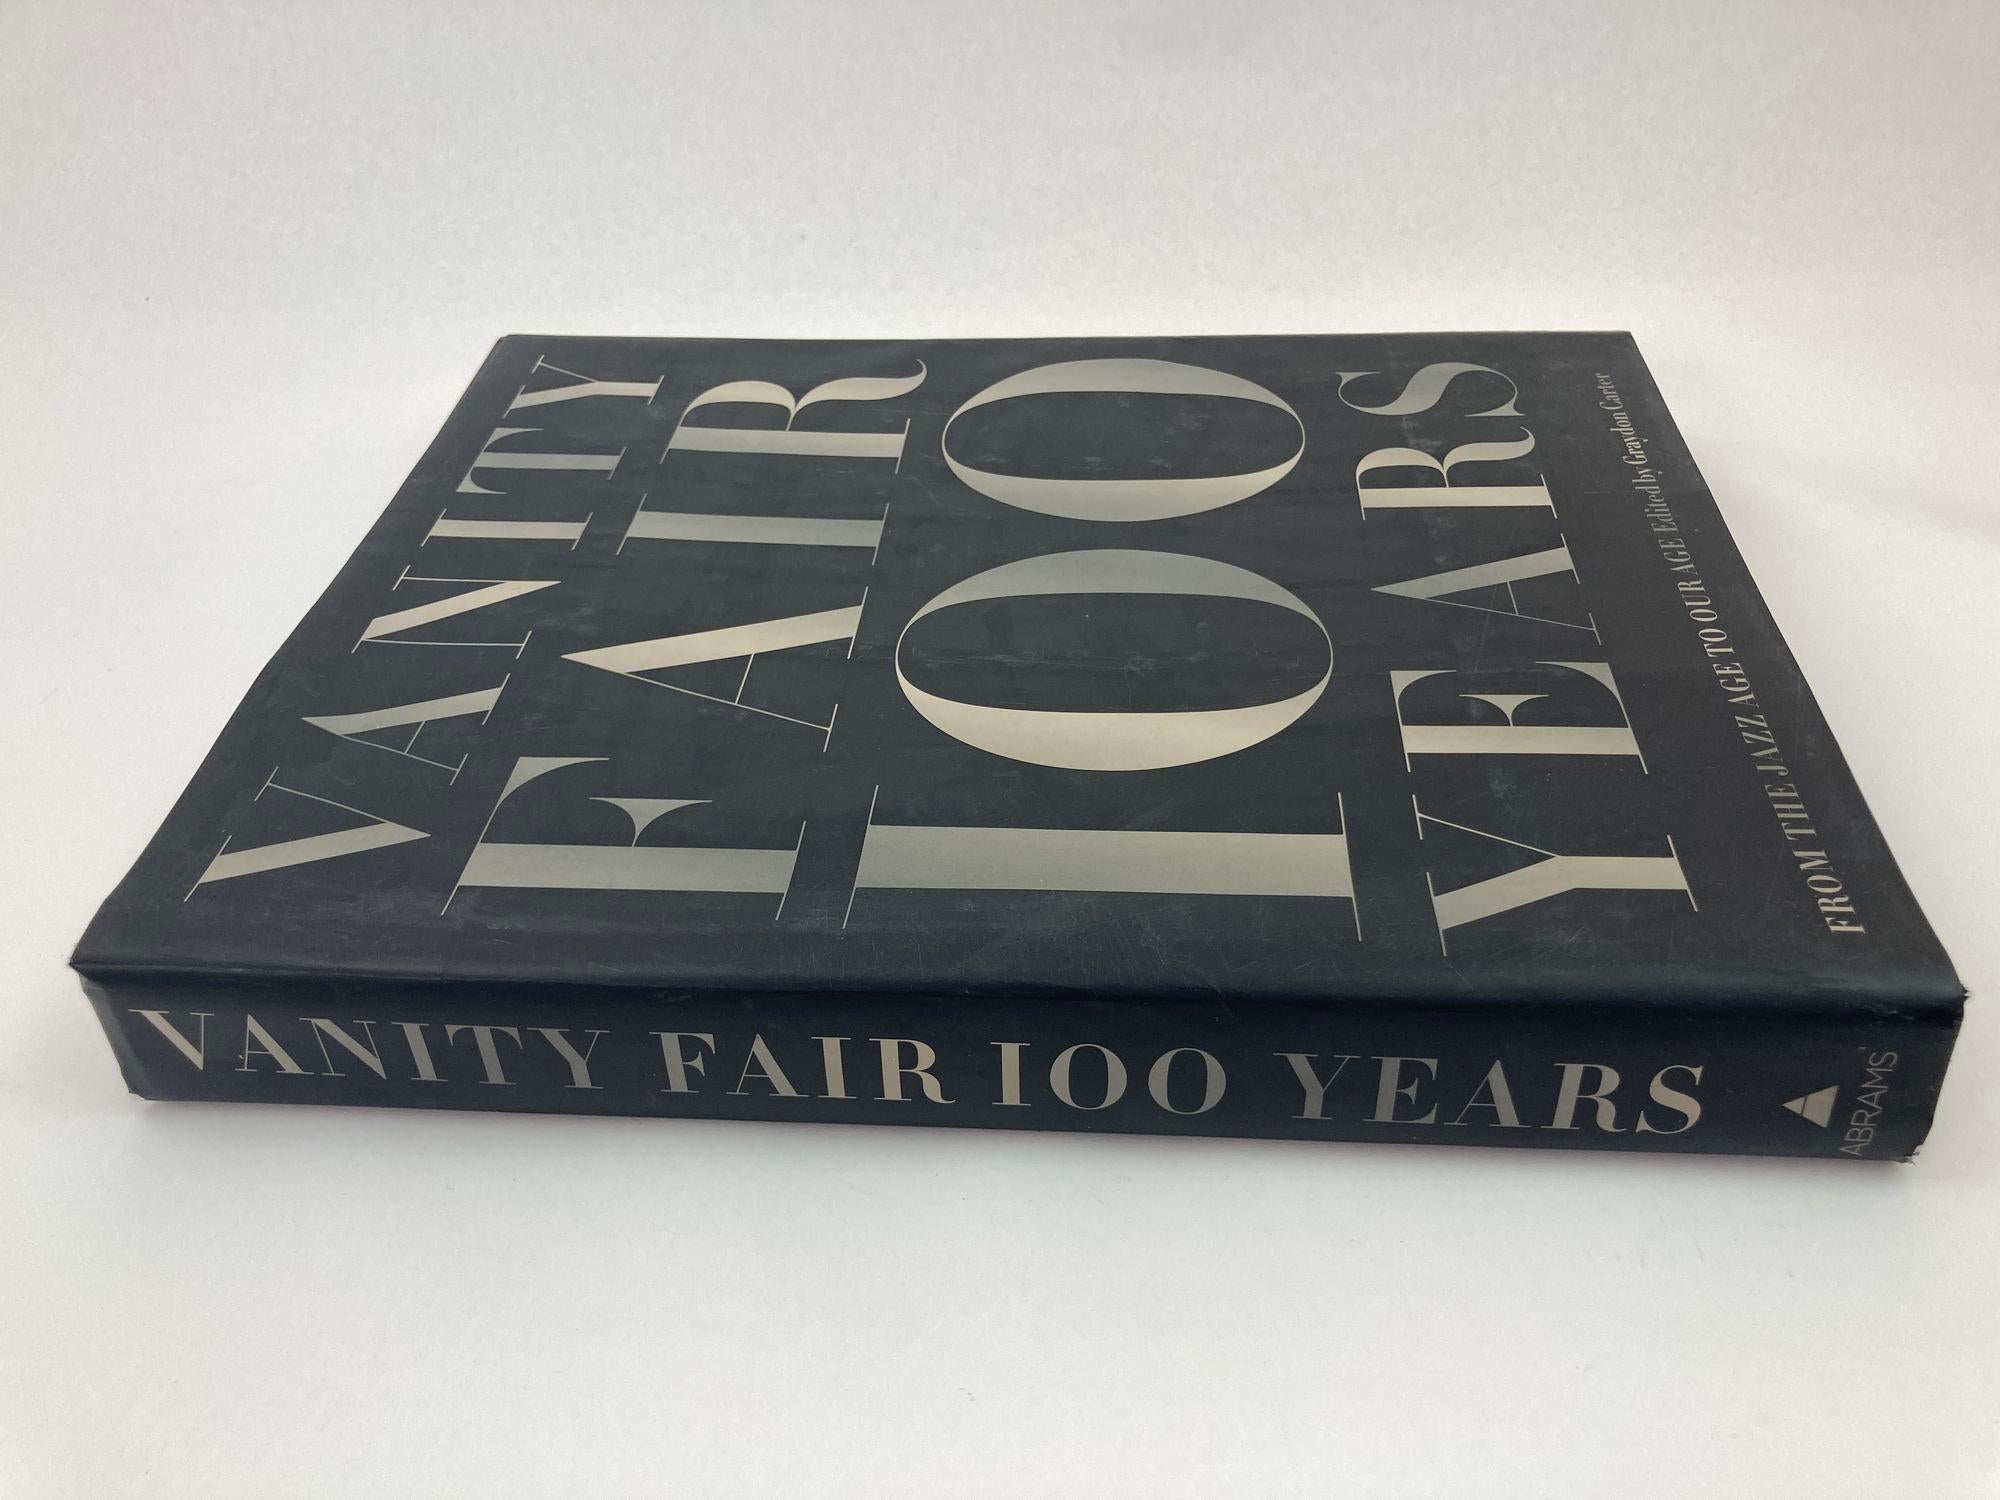 Américain Vanity Fair 100 Years from the Jazz Age to Our Age 2013 grand livre à couverture rigide en vente